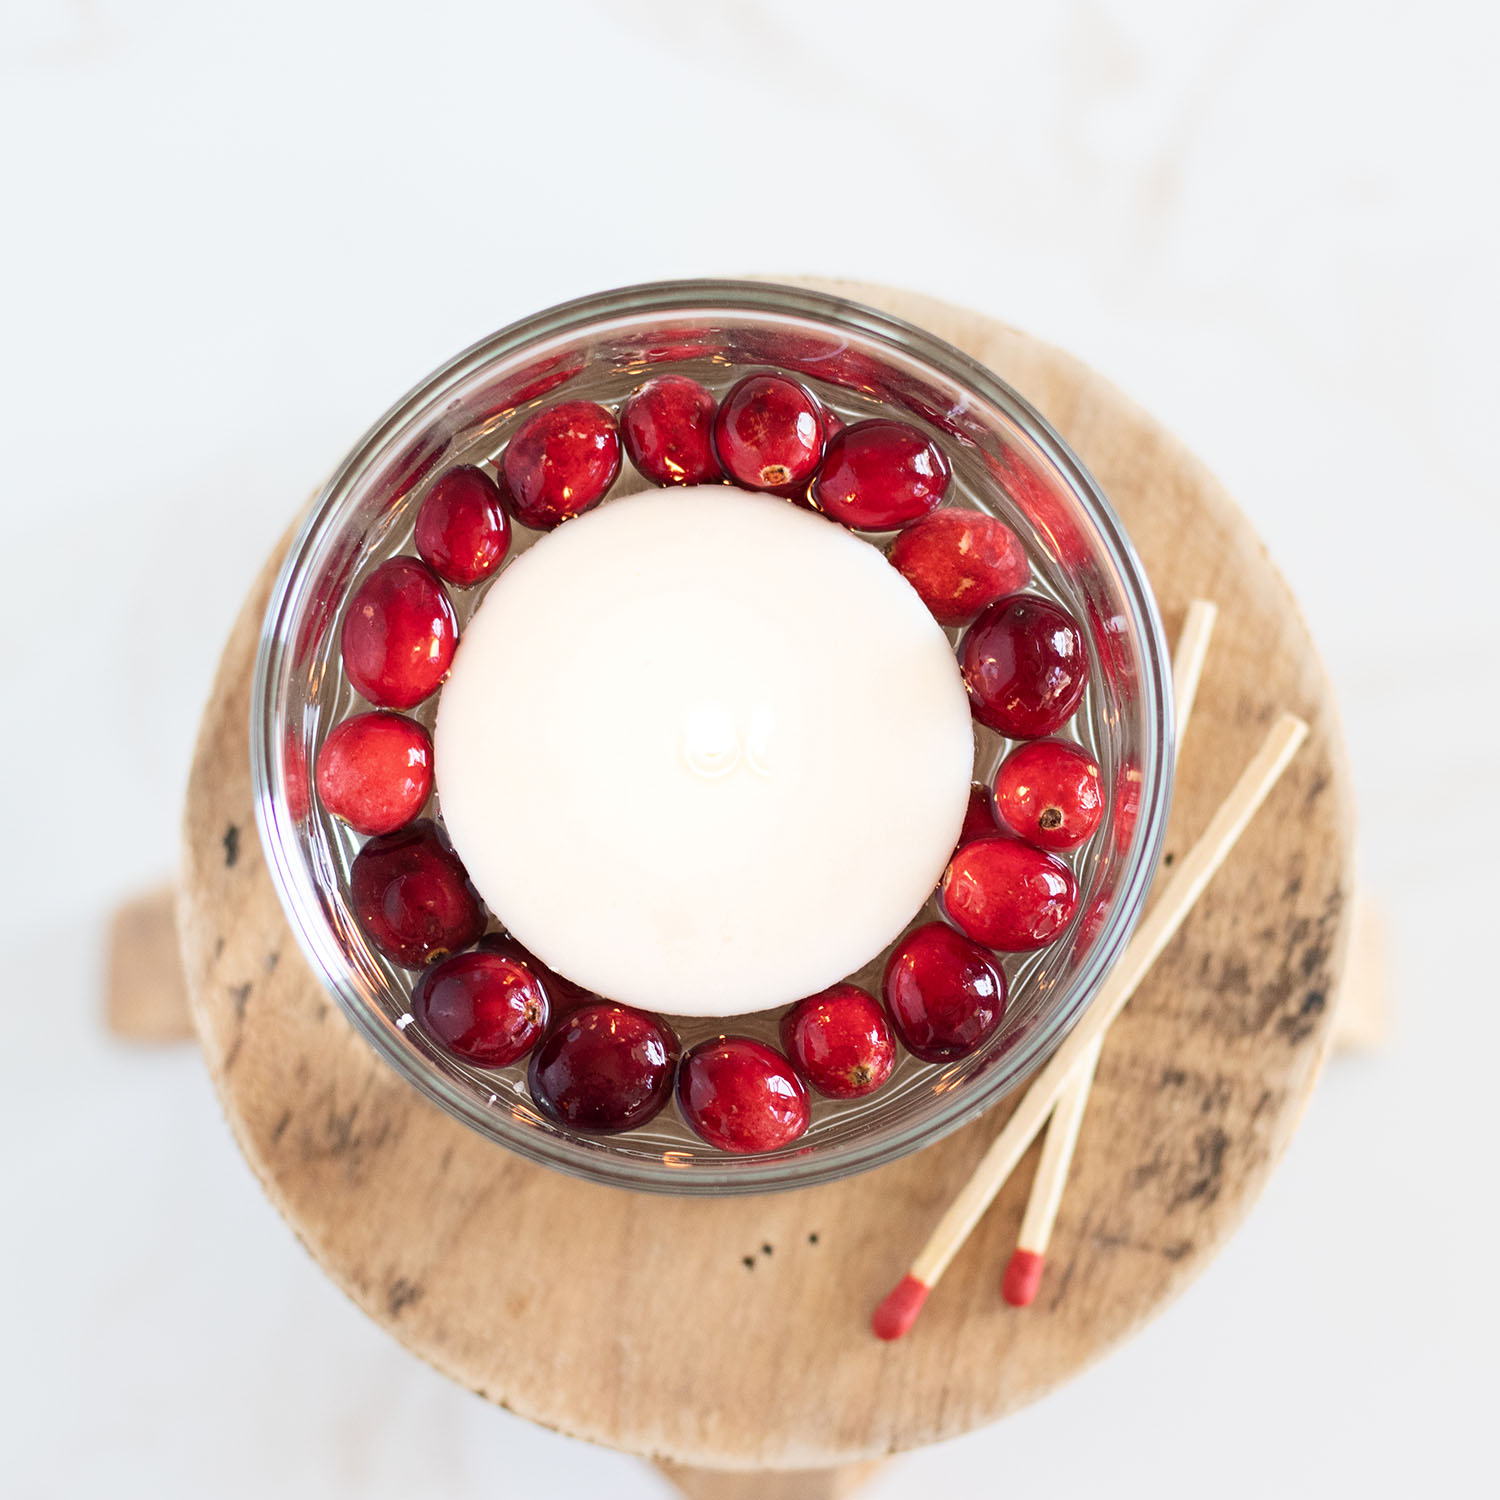 Cranberry Floating Candle Centerpiece